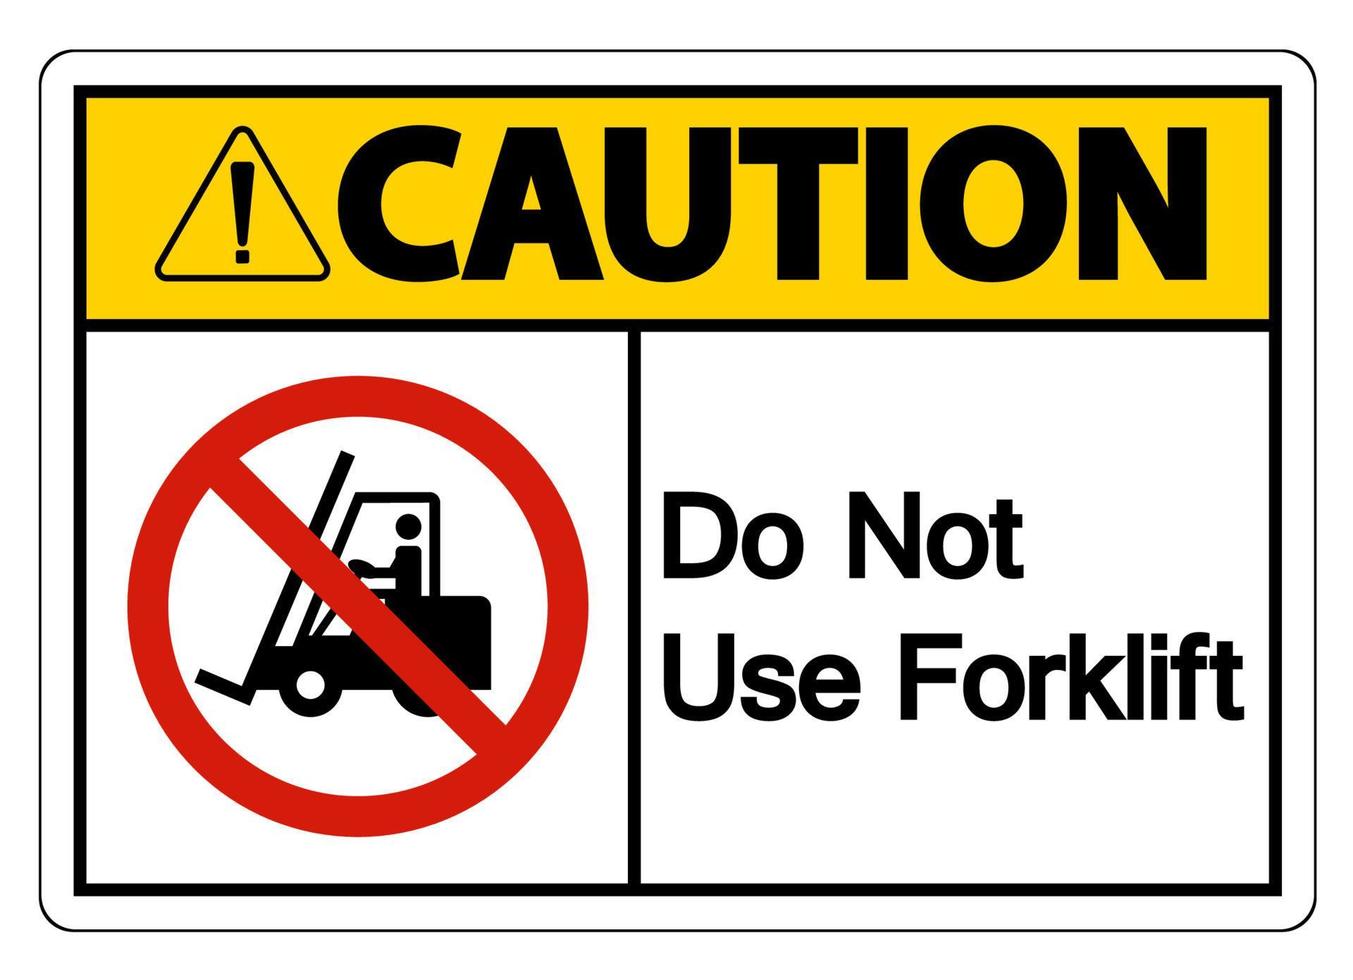 Caution Do Not Use Forklift Sign On White Background vector